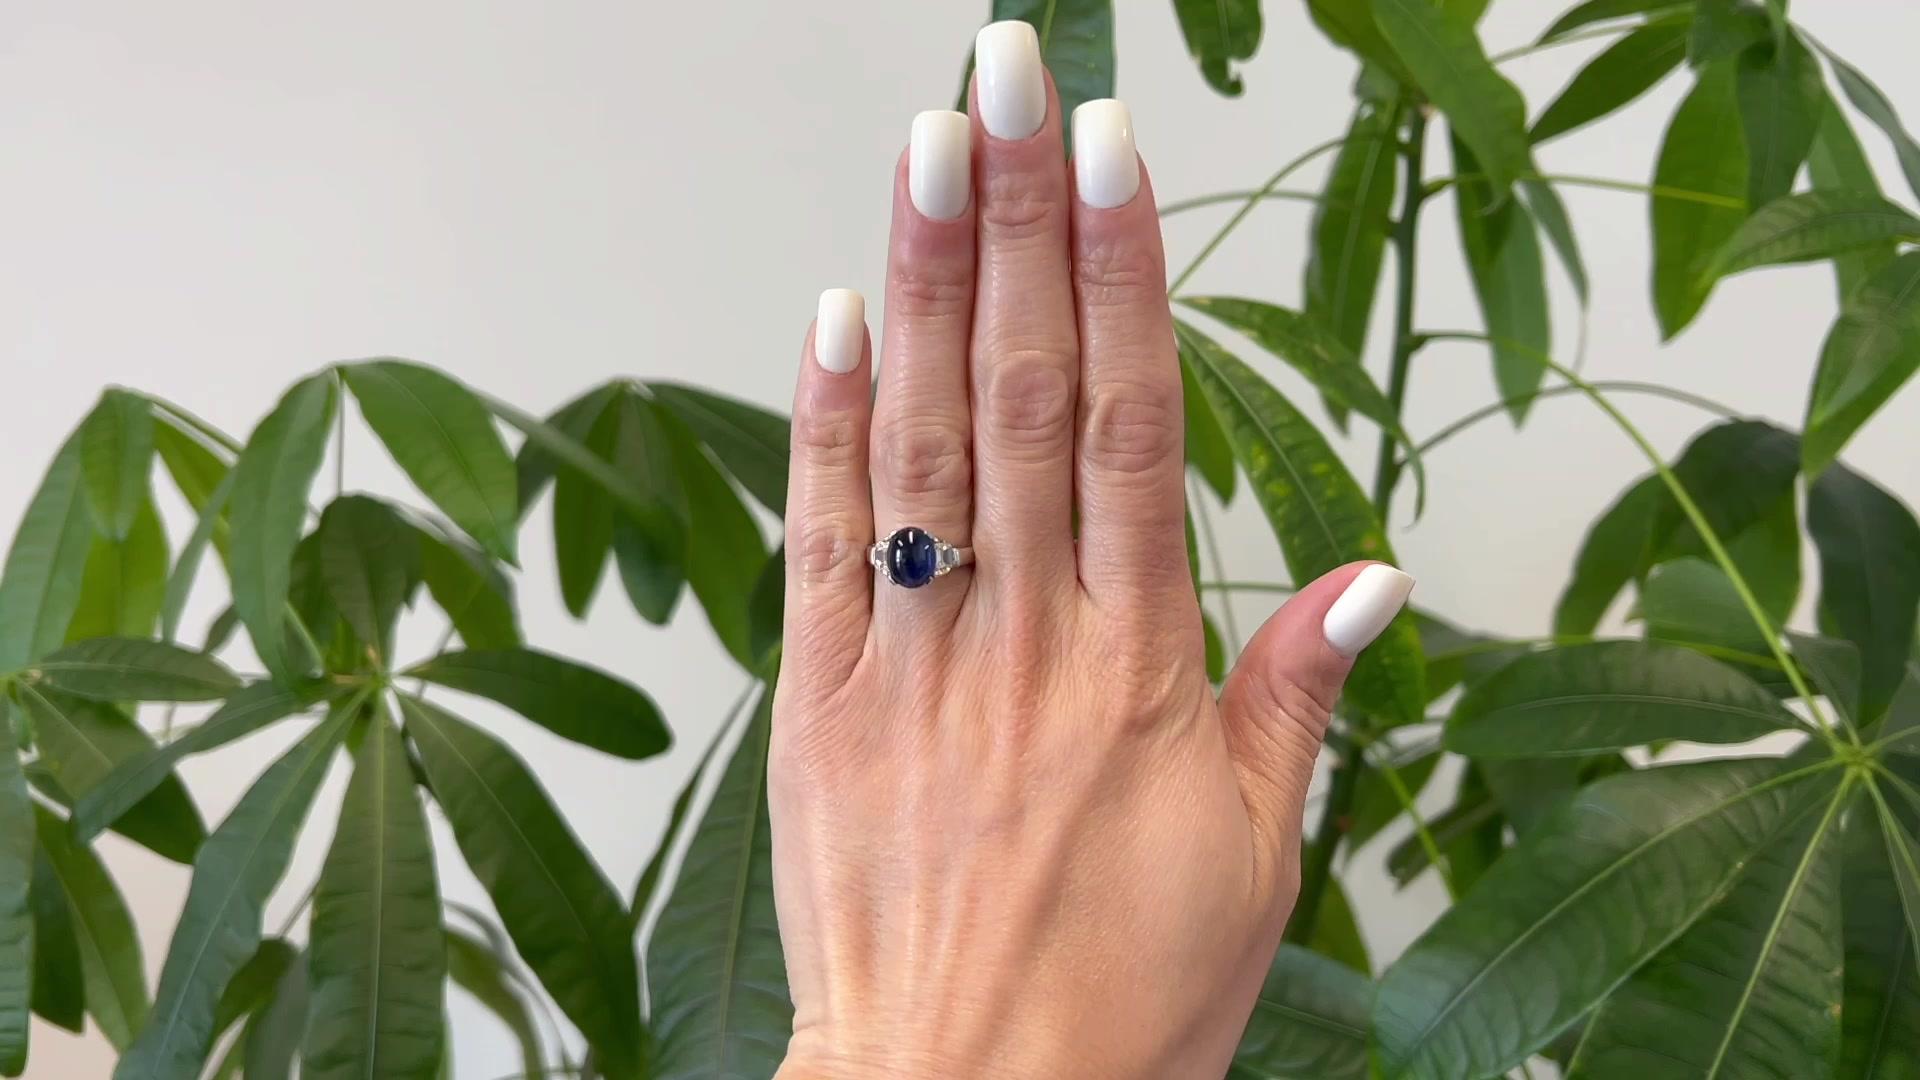 One Vintage GIA Thai Sapphire Diamond 18k White Gold Ring. Featuring one GIA cabochon cut sapphire of approximately 4.40 carats, accompanied with GIA certificate #5222869358 stating the sapphire is of Thai origin. Accented by two half-moon step cut